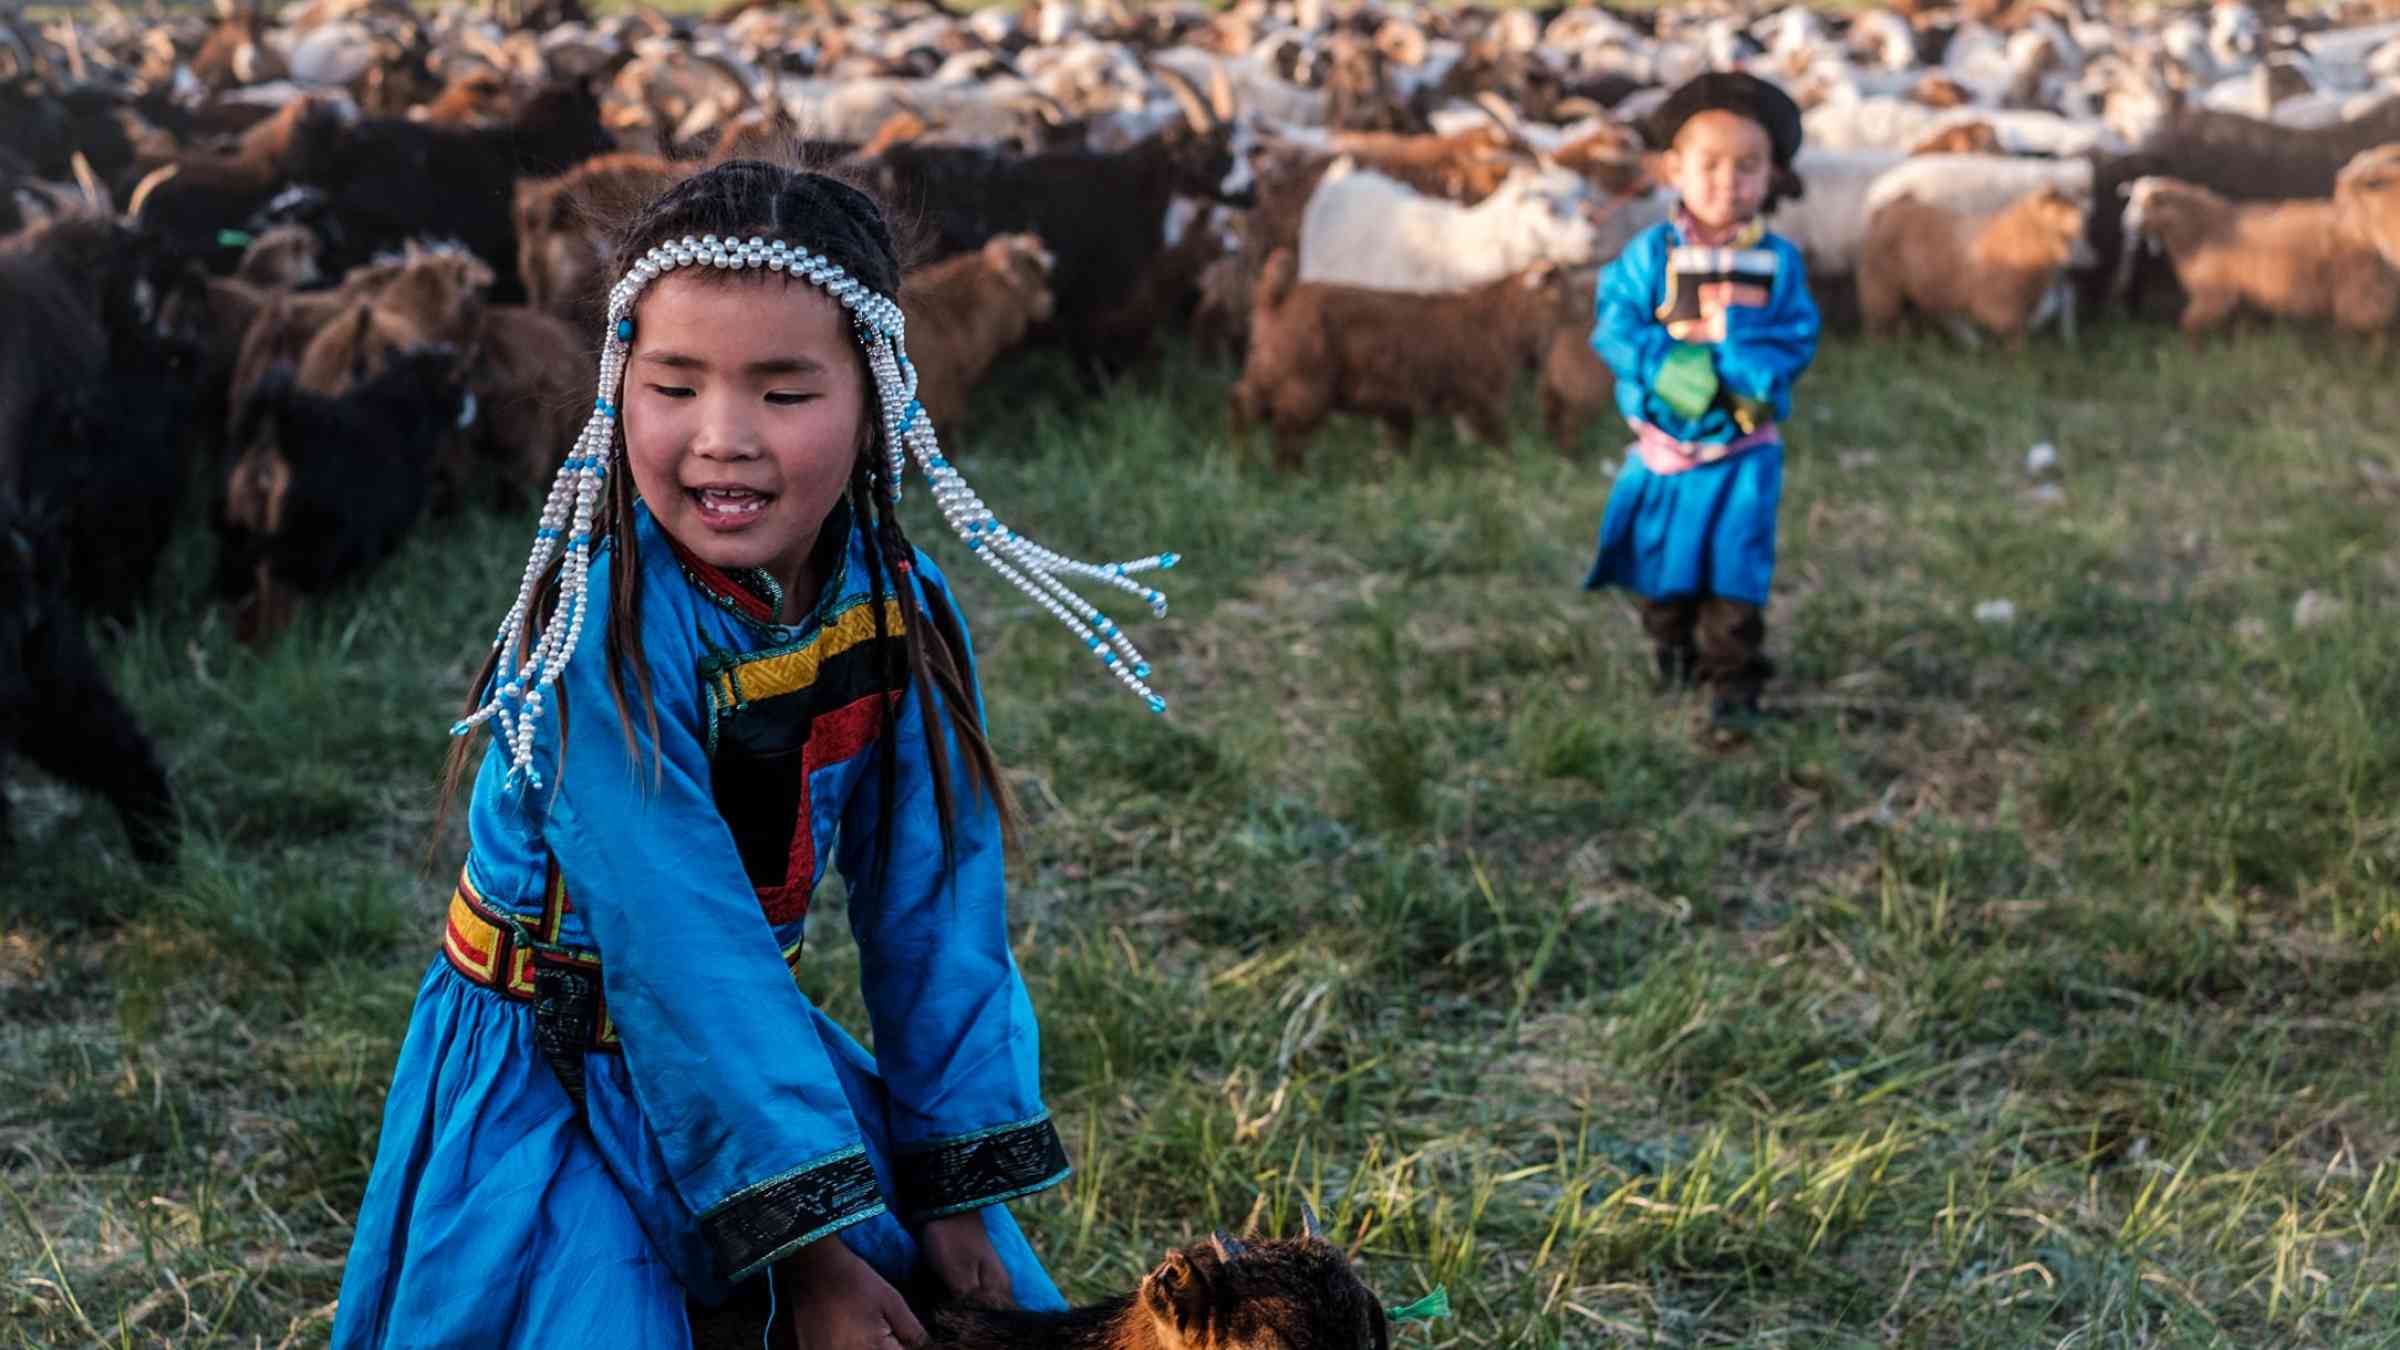 A photo of two laughing children wearing traditional Mongolian dress in a field with cashmere goats